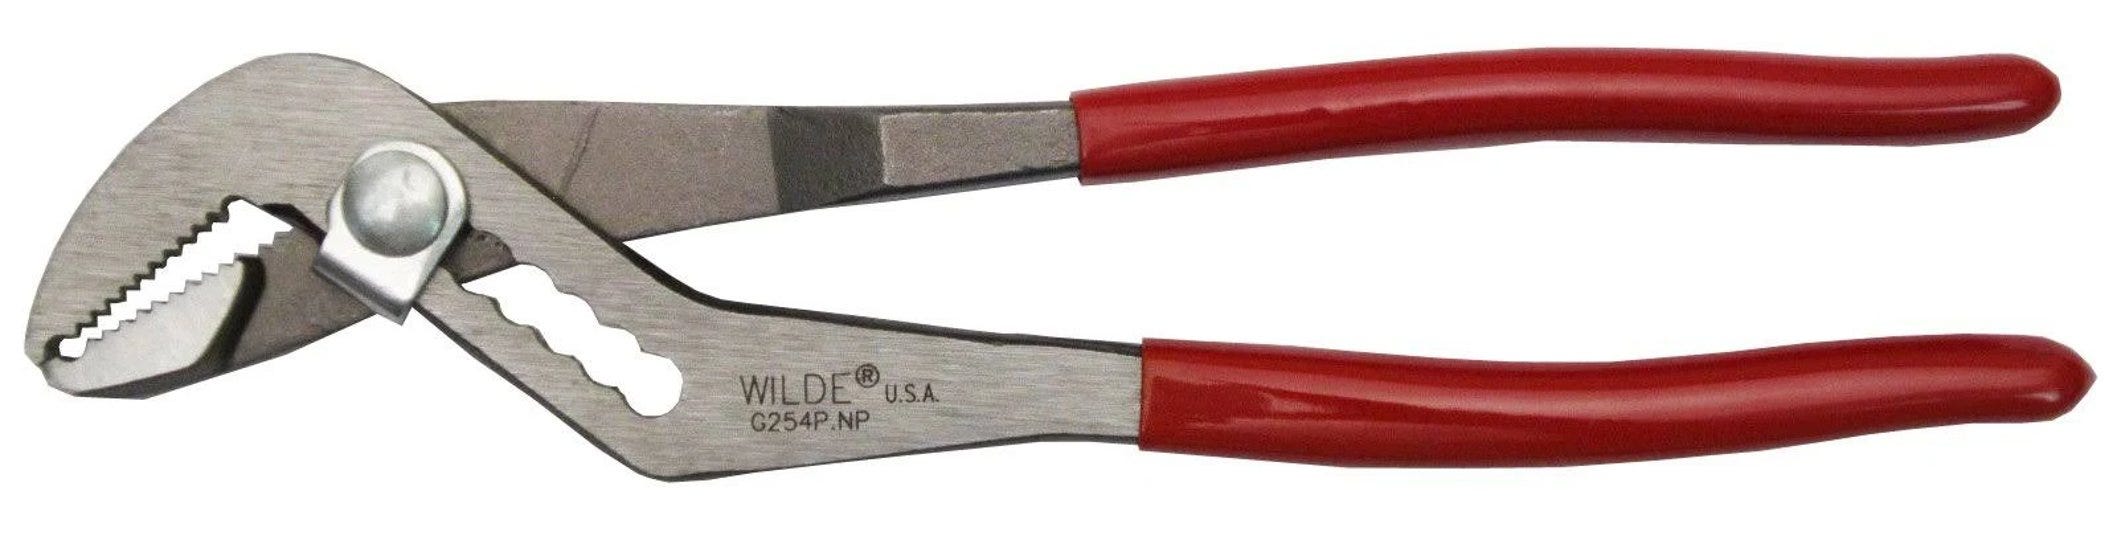 wilde-tool-co-g254p-np-cs-11-in-water-pump-slip-joint-pliers-polished-clam-card-1